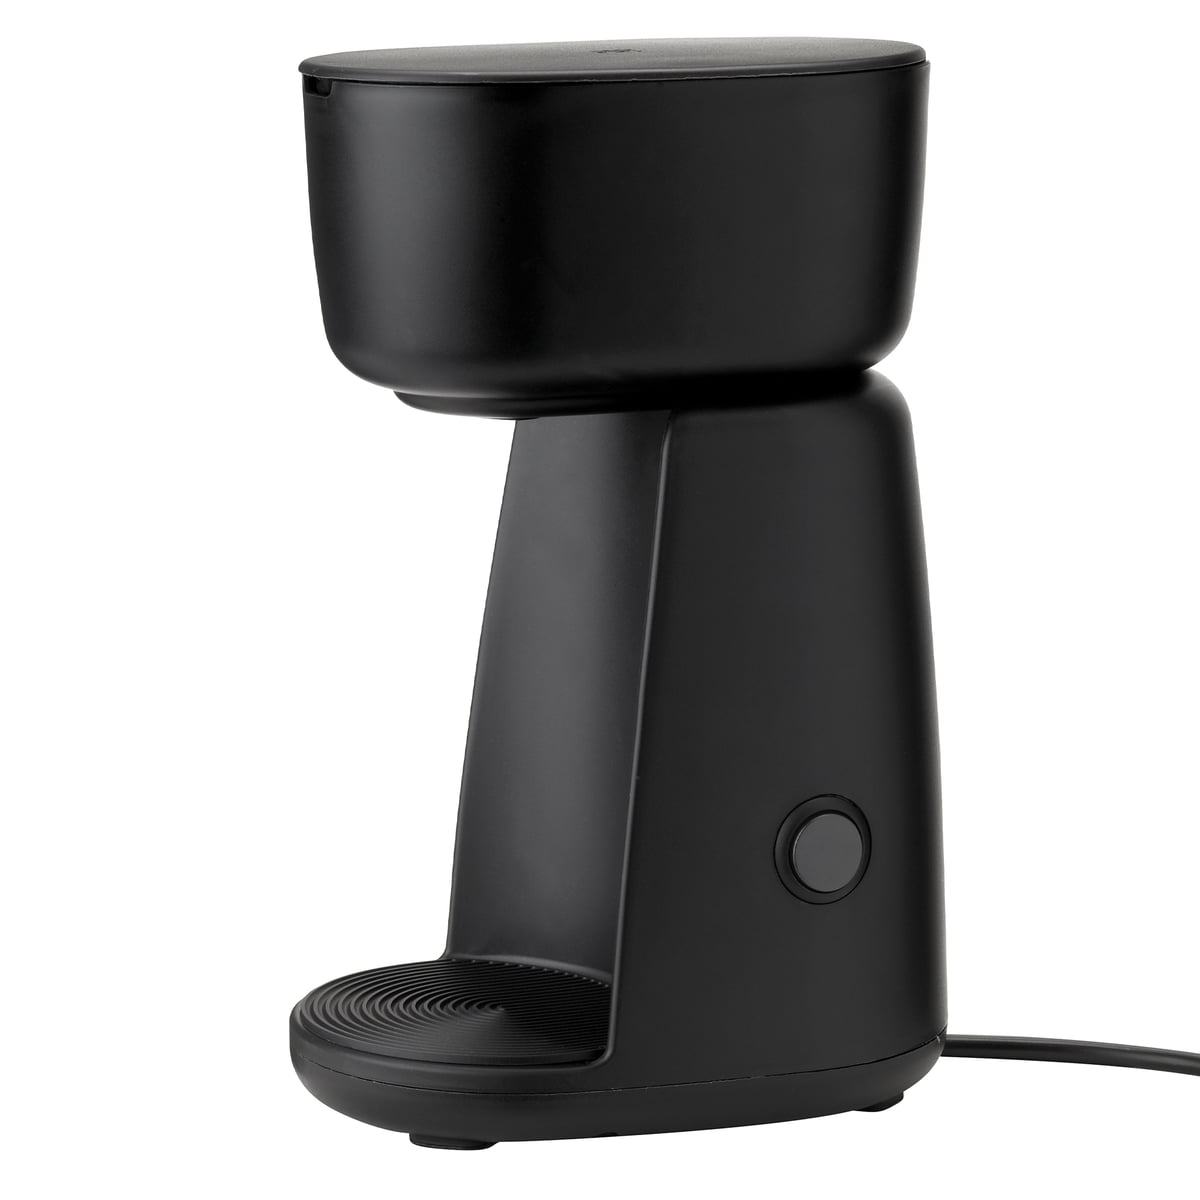 RIG-TIG - FOODIE electric milk frother